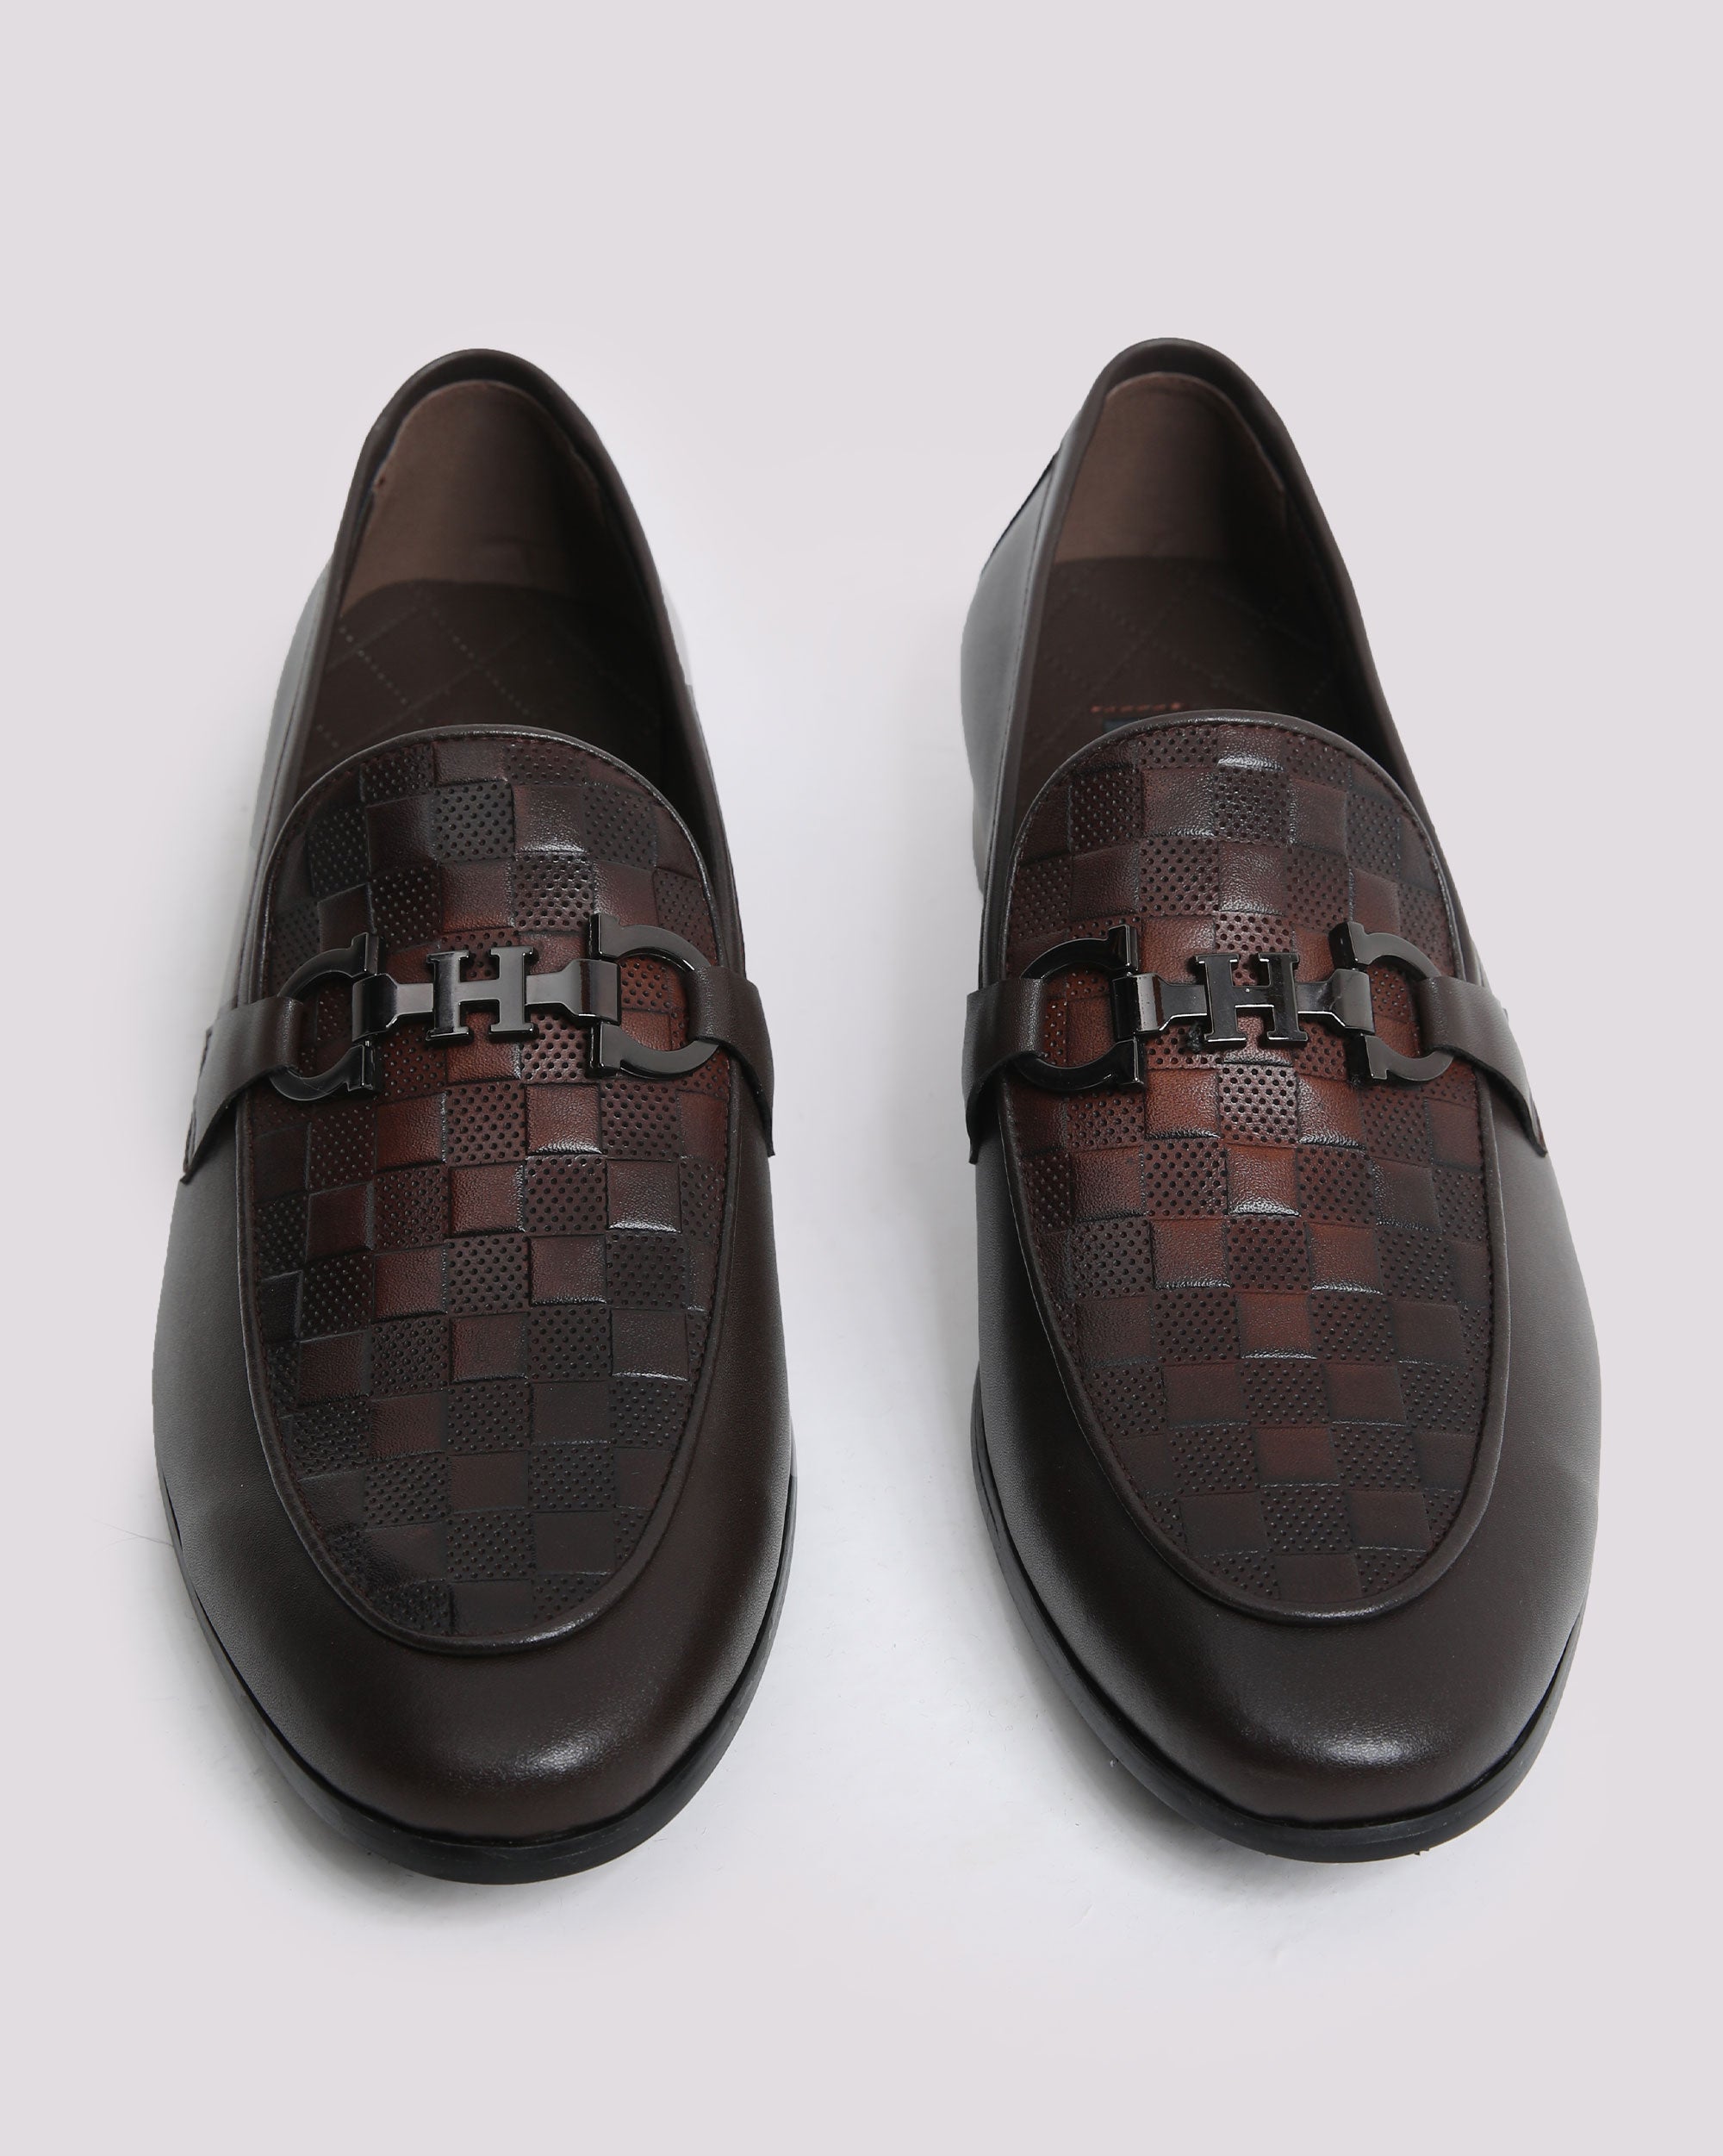 COFFEE TEXTURED BUCKLE SHOES